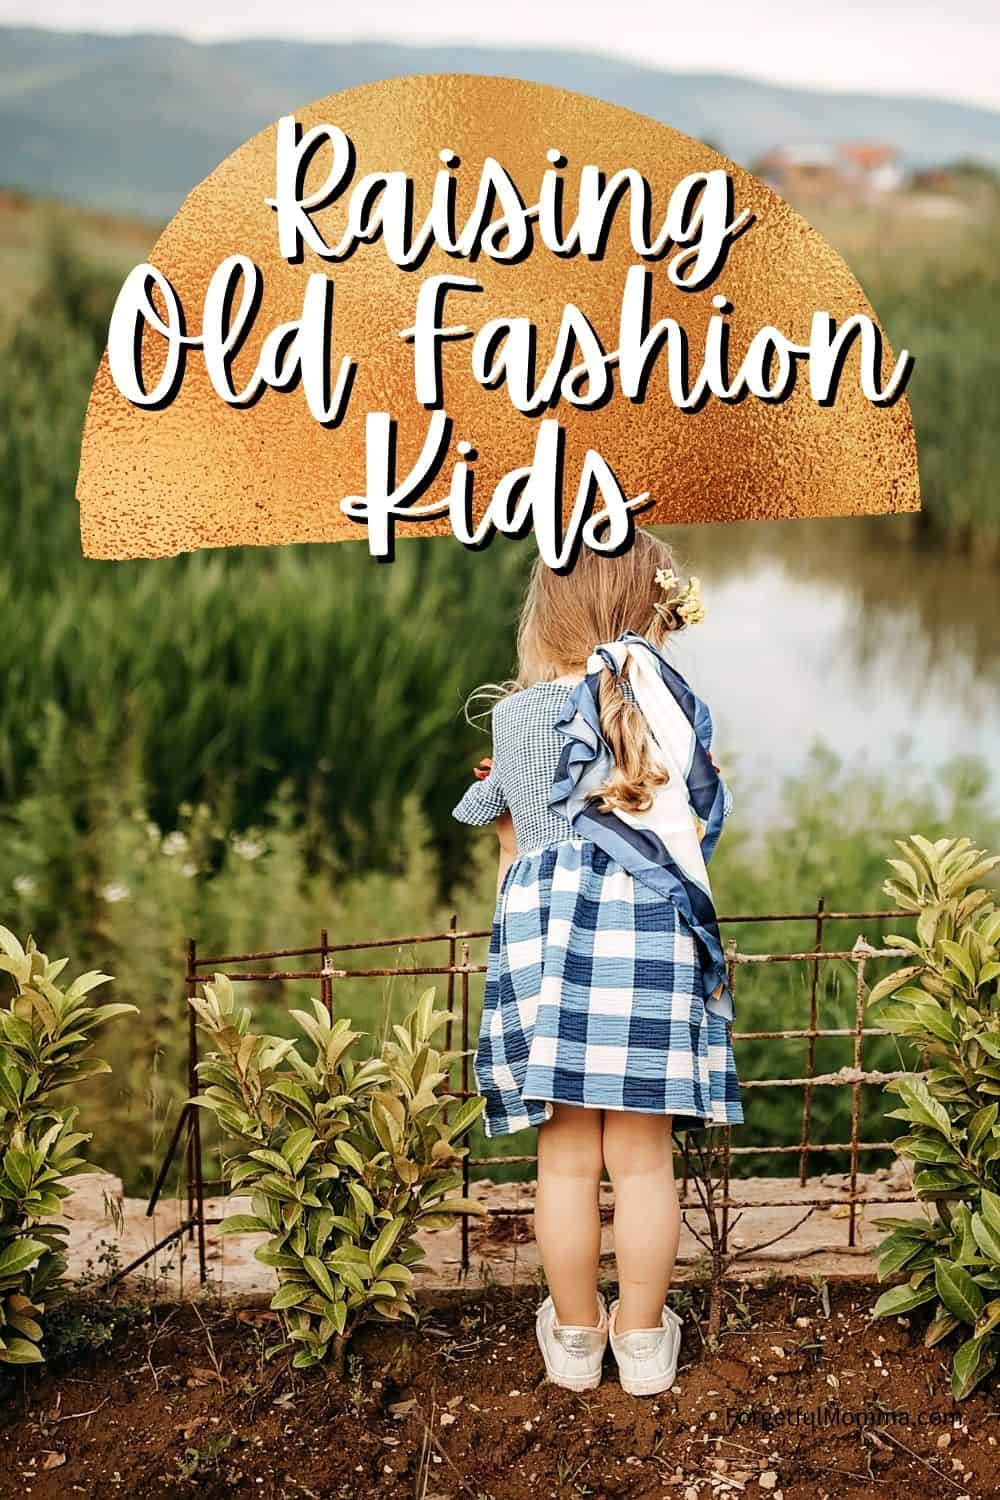 Raising Old Fashion Kids - girl leaning on a fence with text overlay